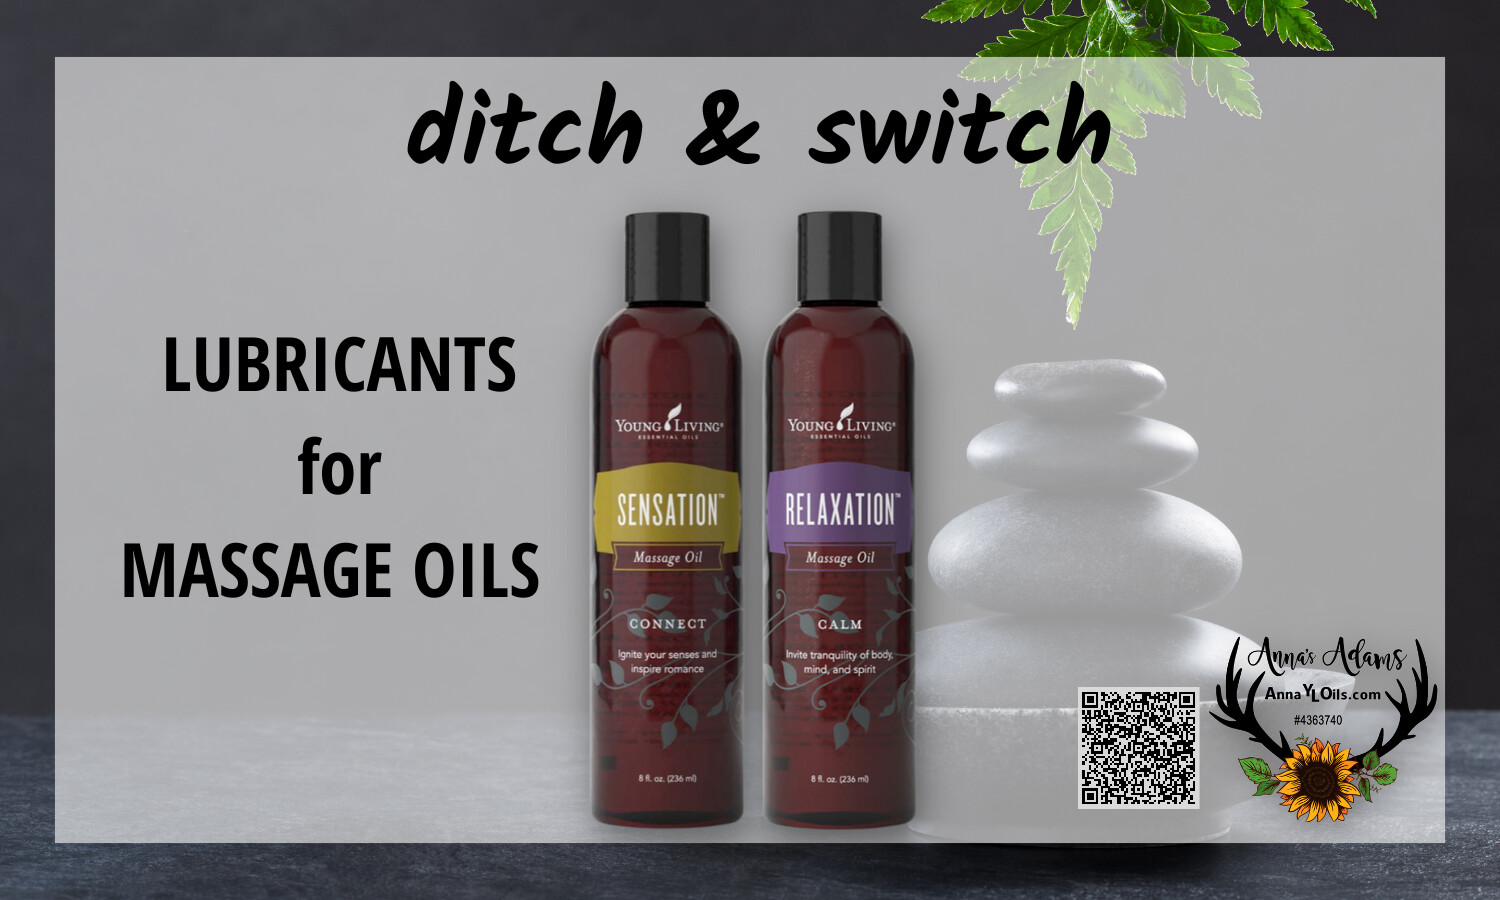 Ditch & Switch Lubricants for Massage Oils